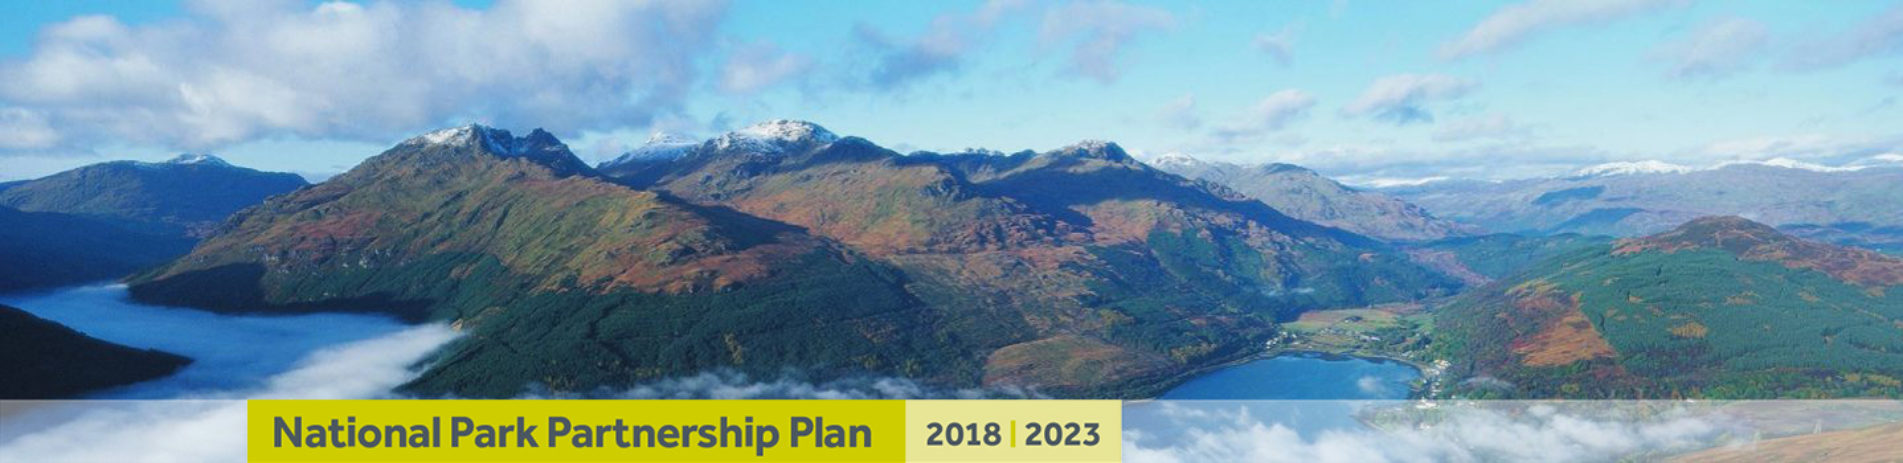 arrochar-alps-panorama-with-loch-long-covered-by-mists-at-bottom-of-picture-as-well-as-banner-reading-national-park-partnership-plan-two-thousand-eighteen-two-thousand-twenty-three